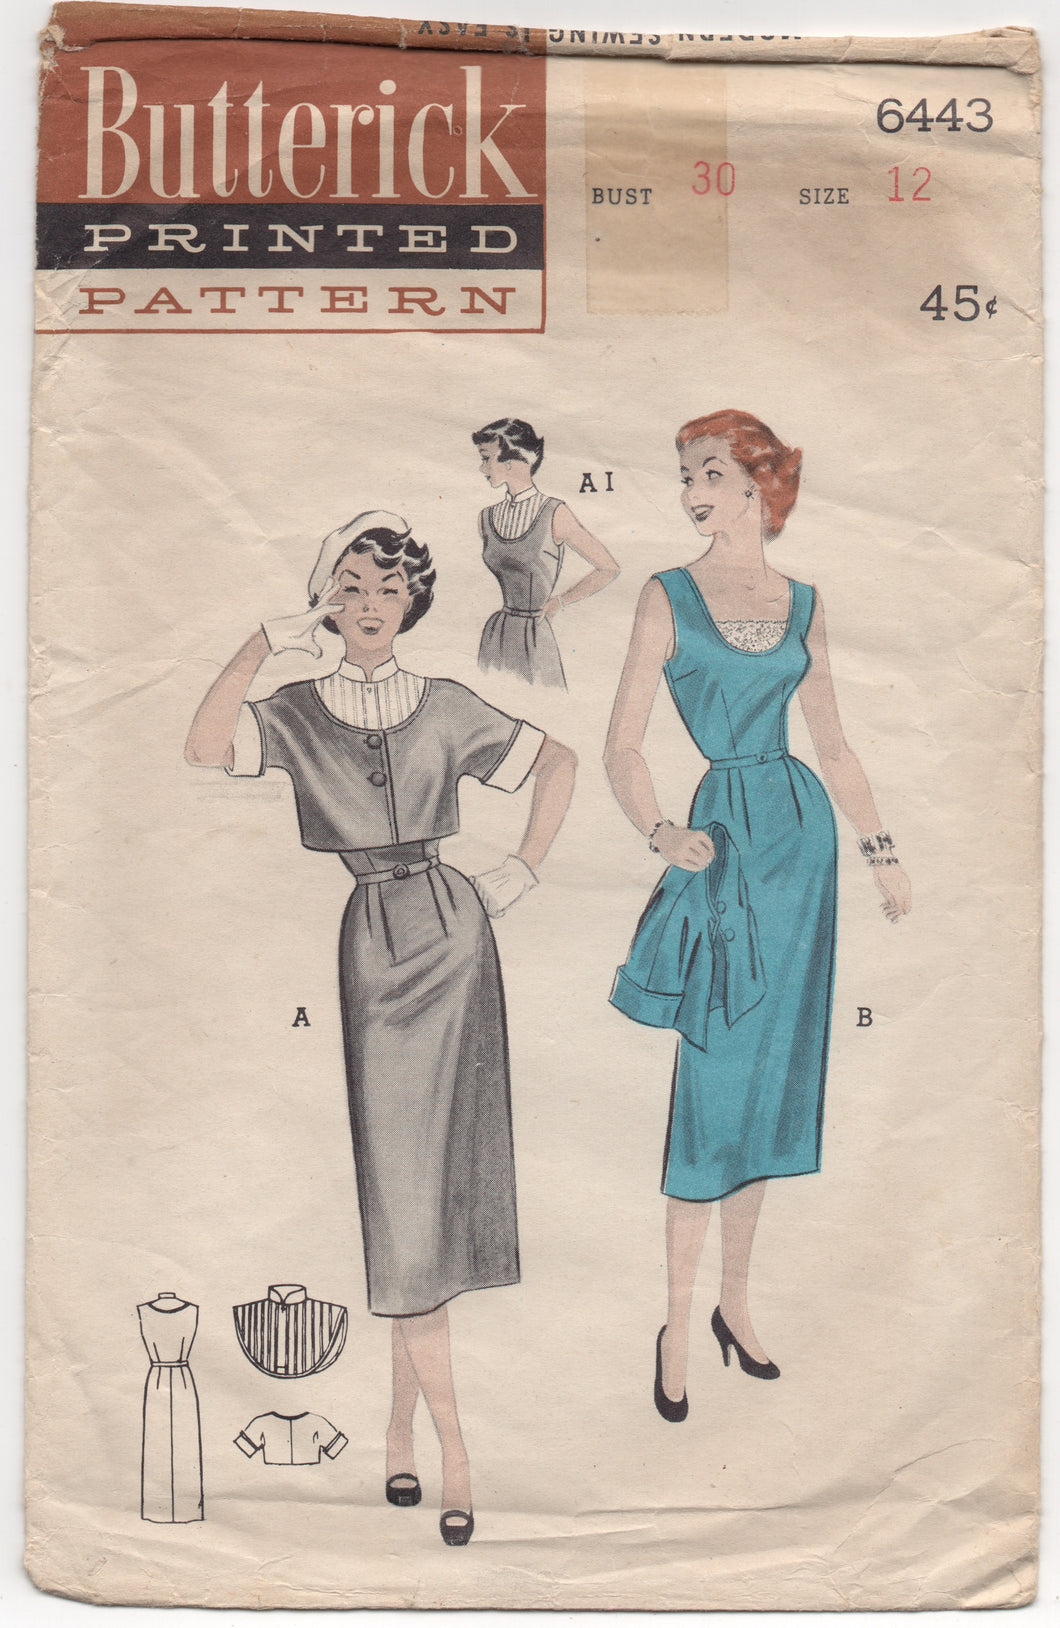 1950's Butterick One Piece Slim Fit Dress and Bolero with Separate Yoke Pattern - Bust 30